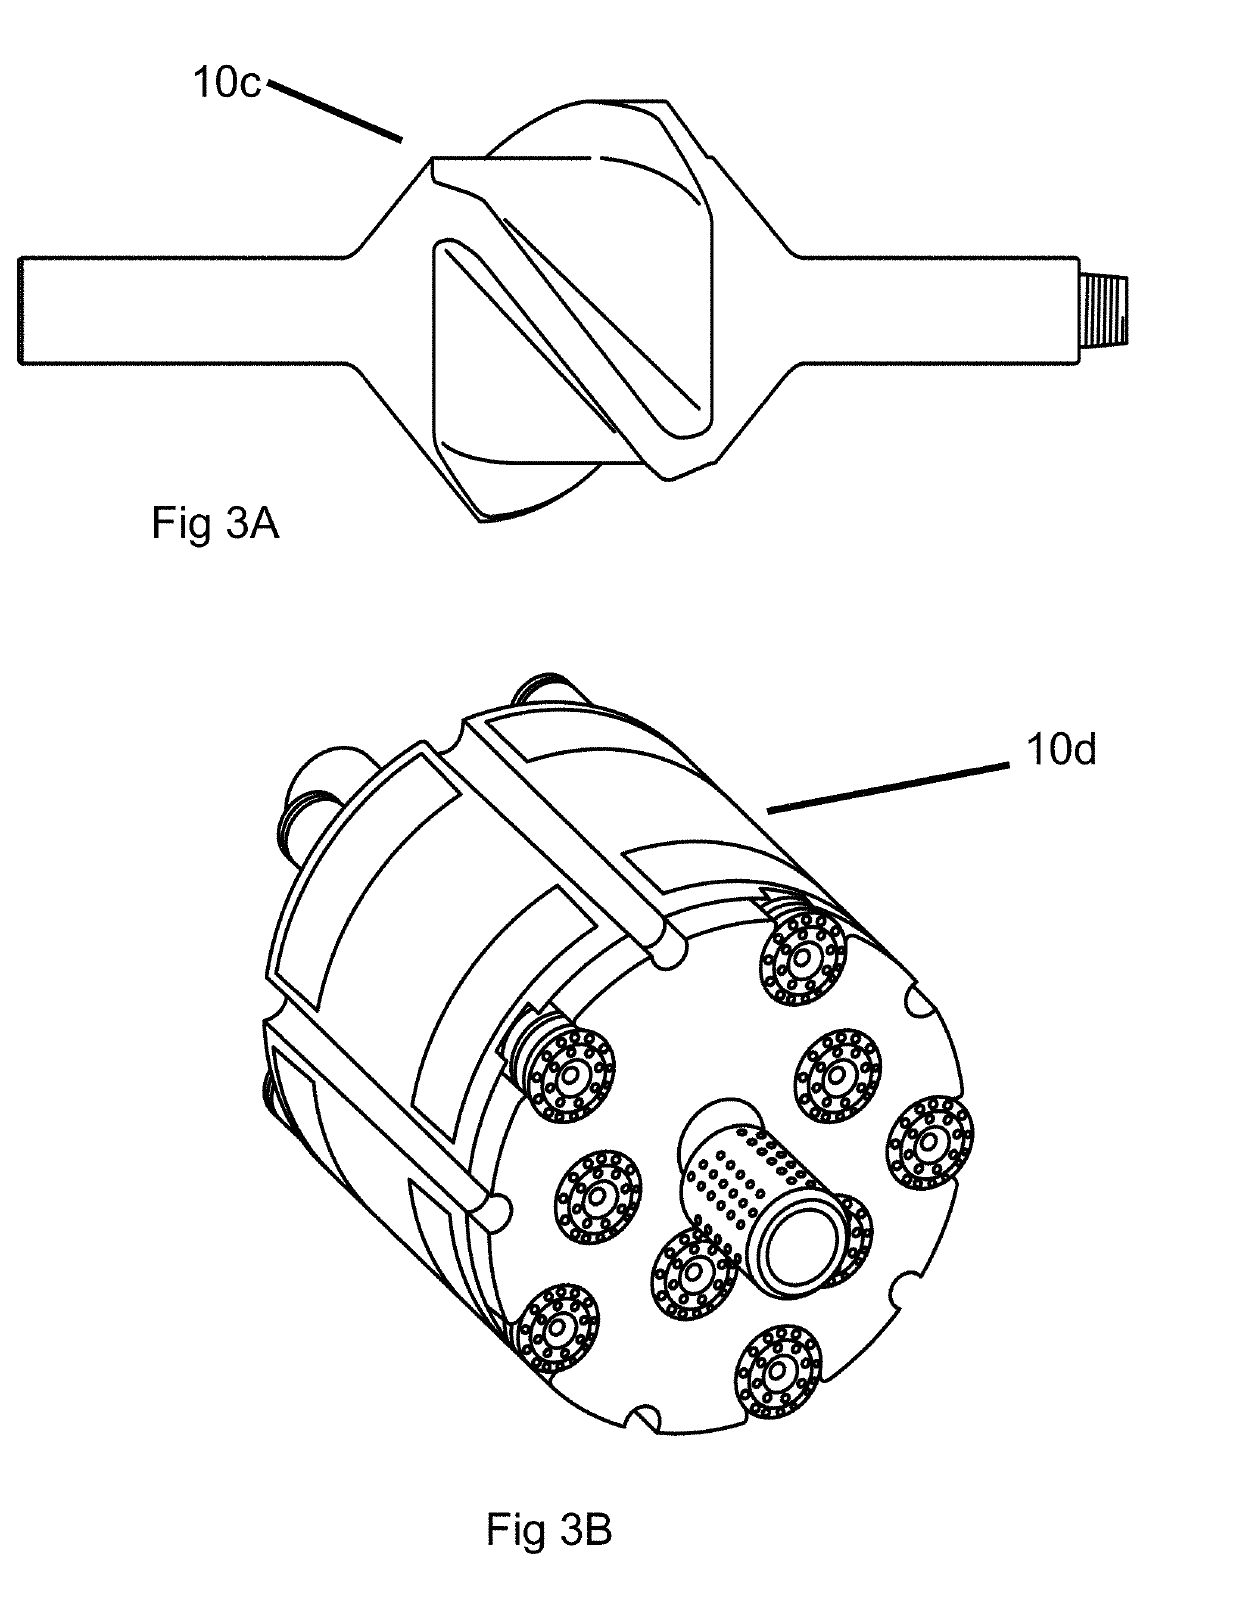 Capsule system for deep geologic disposal of nuclear waste